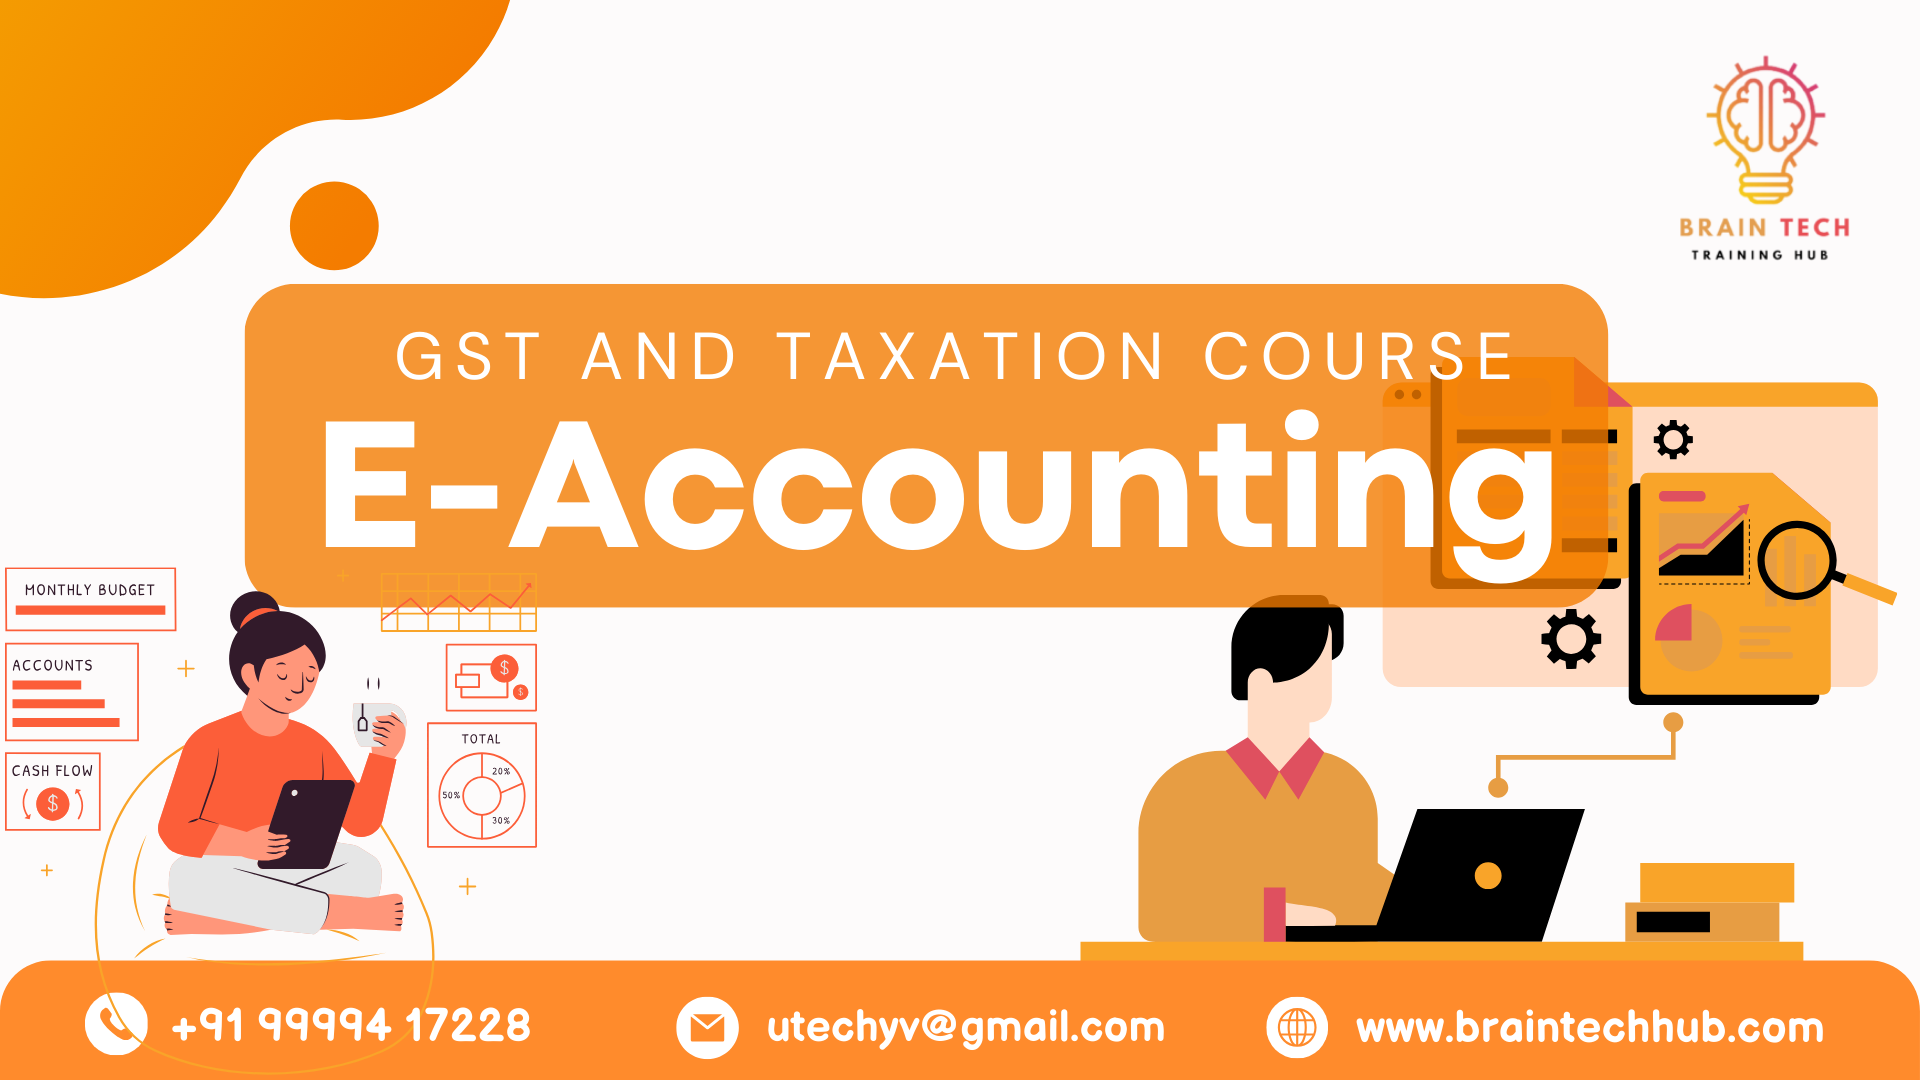 E-Accounting GST and Taxation Course